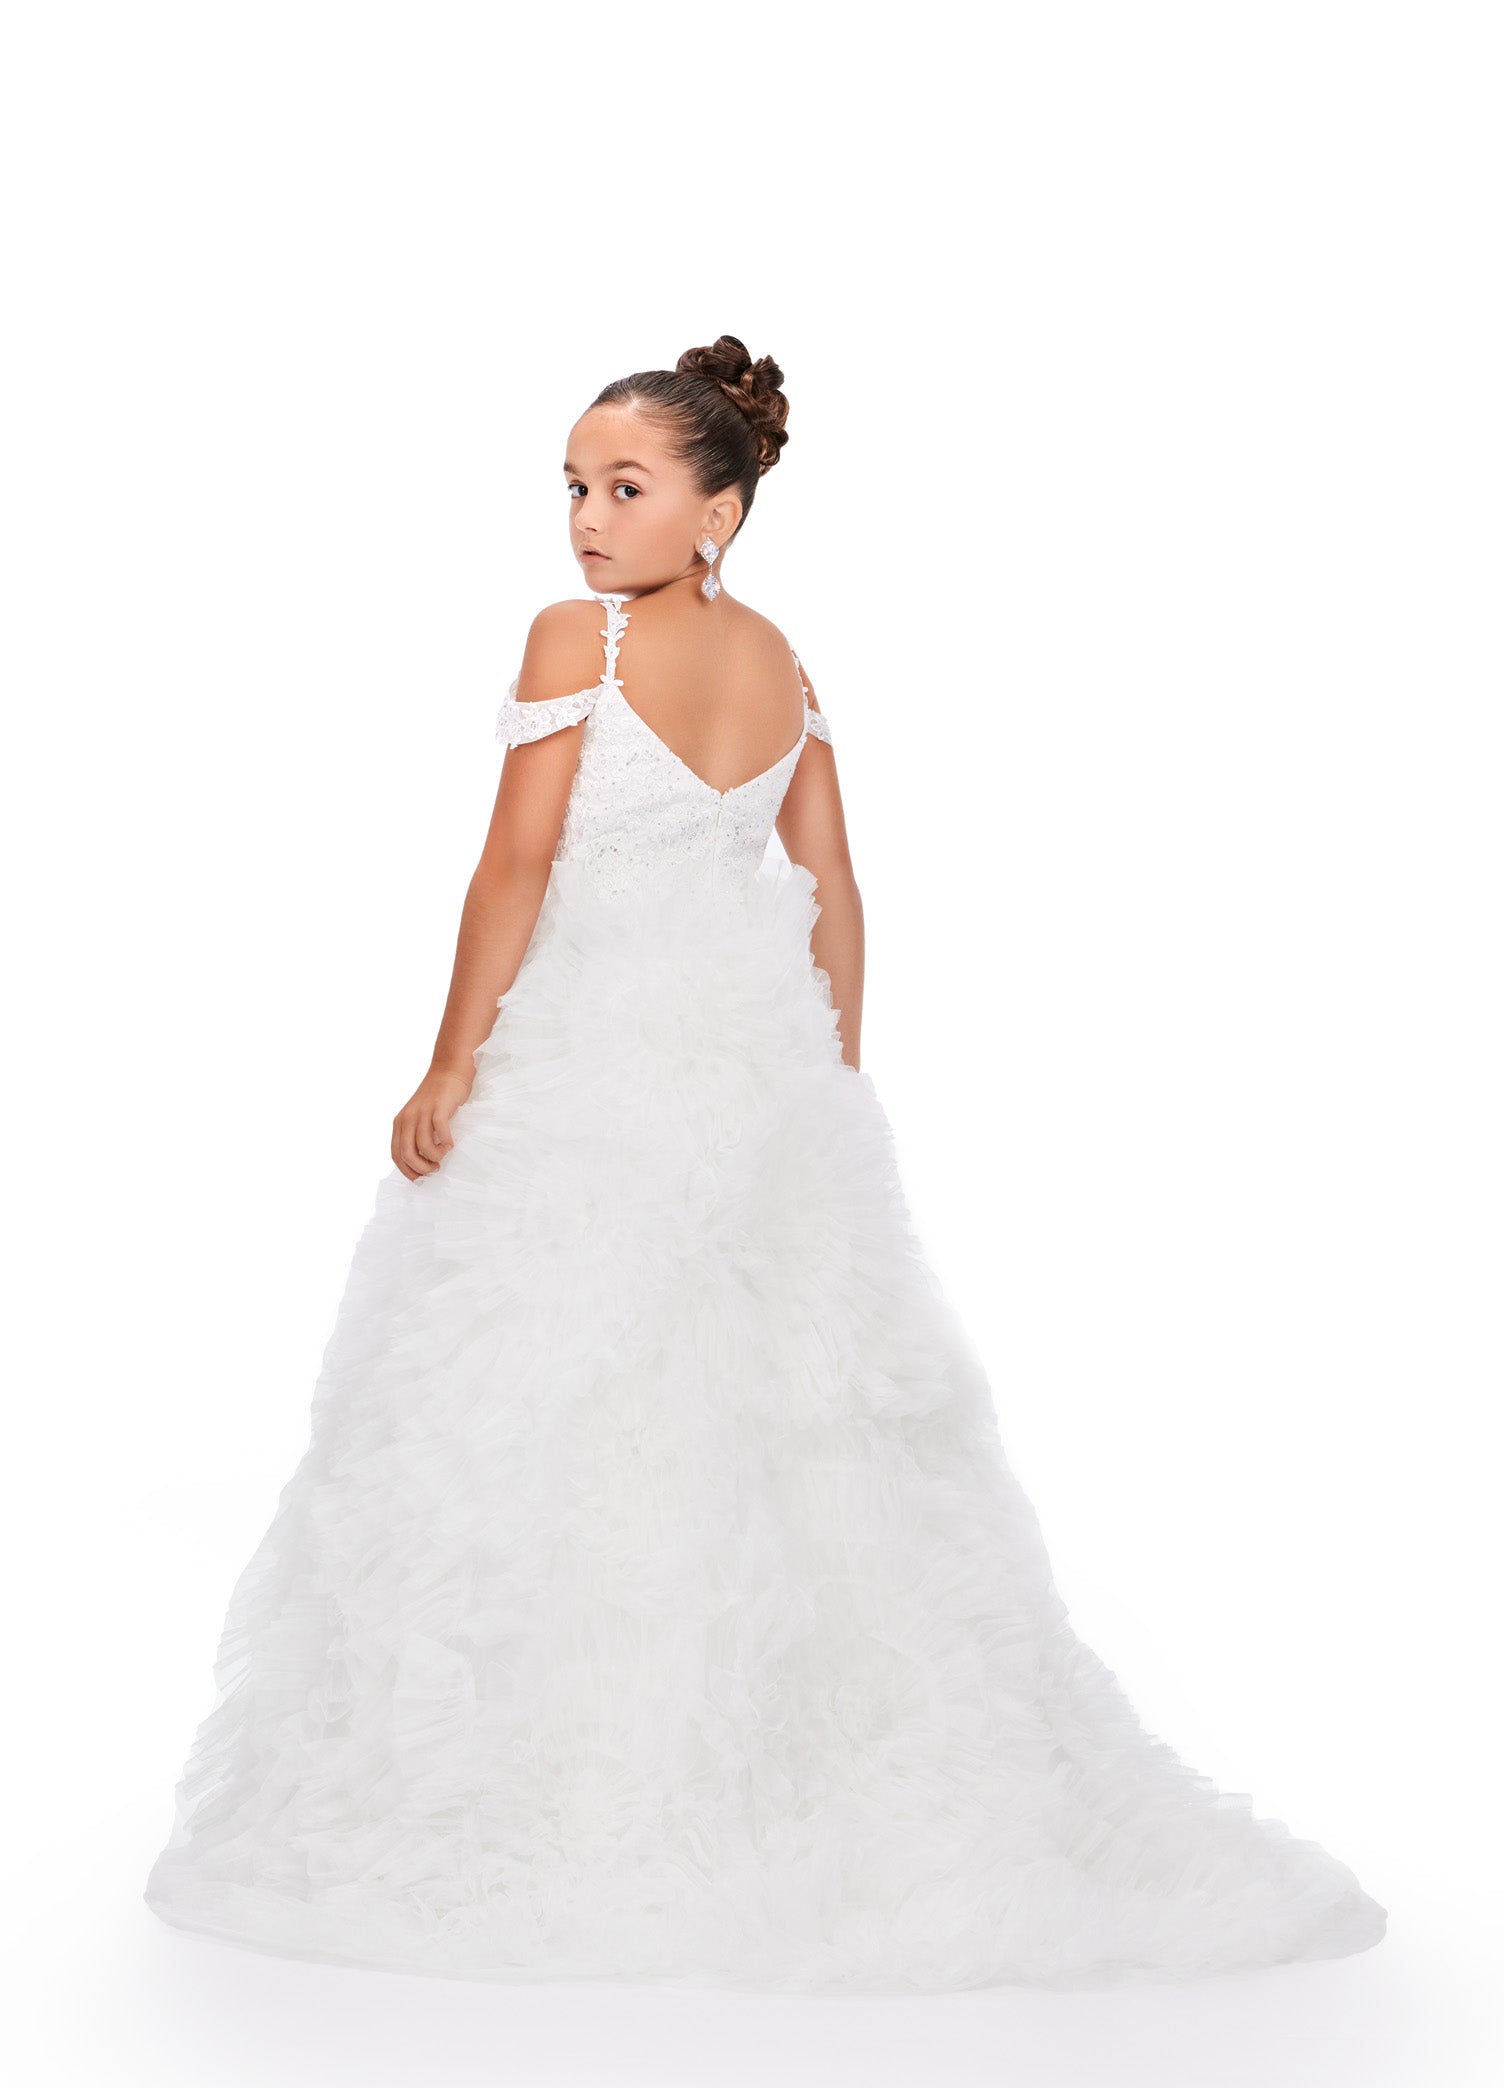 The Ashley Lauren Kids 8246 Girls Pageant Dress exudes elegance and glamour. The off-the-shoulder design features delicate lace and a ruffle detail for a stunning ballgown silhouette. Adorned with crystal embellishments, this dress will make any girl feel like a princess on stage. This elegant kids ball gown features a scoop neckline accented by a lace applique bodice and draping off shoulder straps.